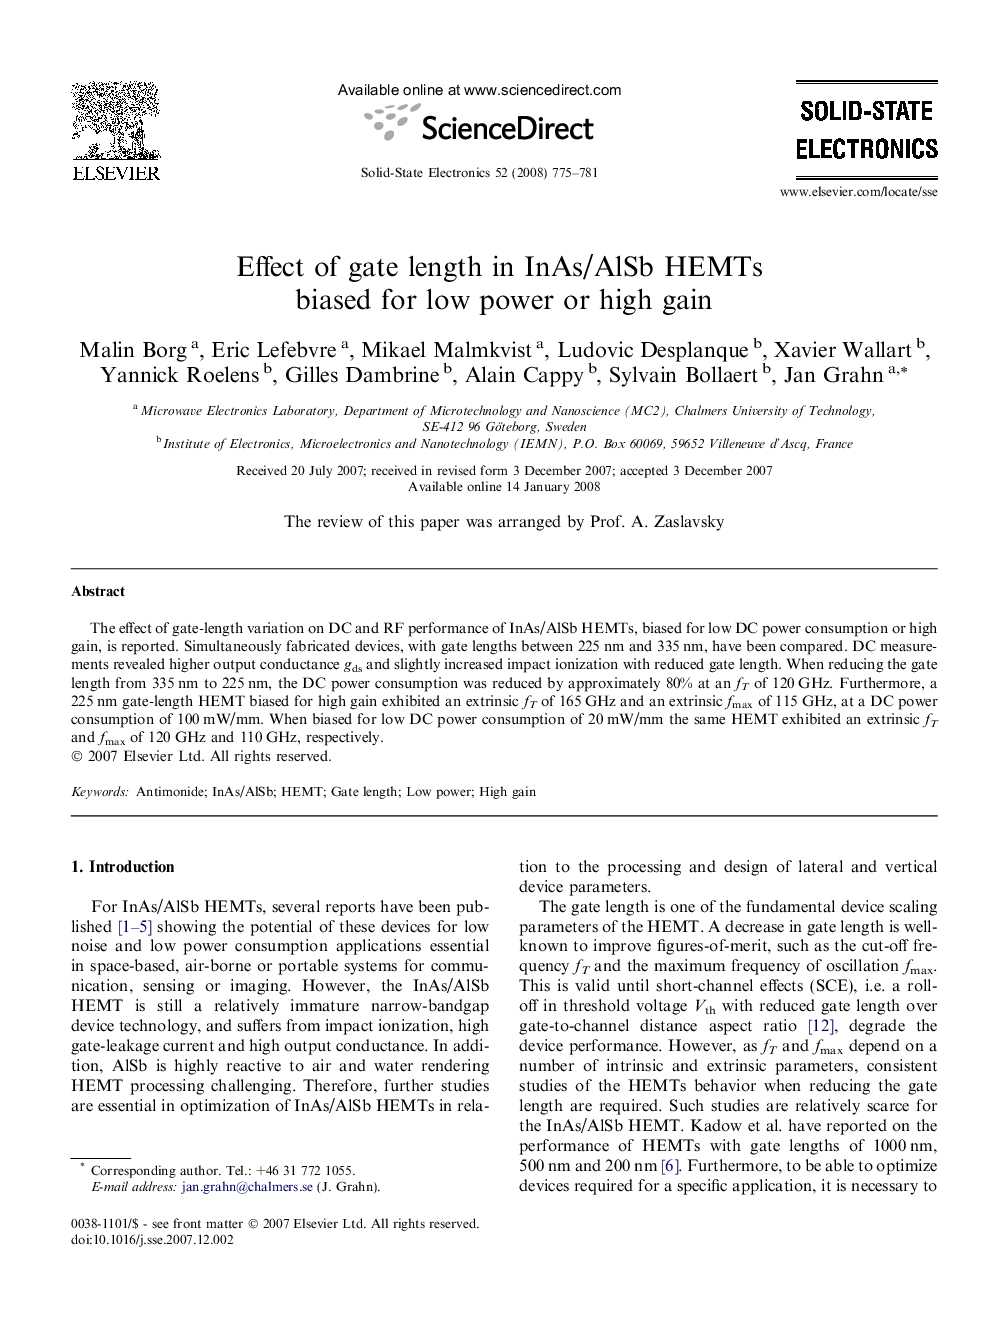 Effect of gate length in InAs/AlSb HEMTs biased for low power or high gain